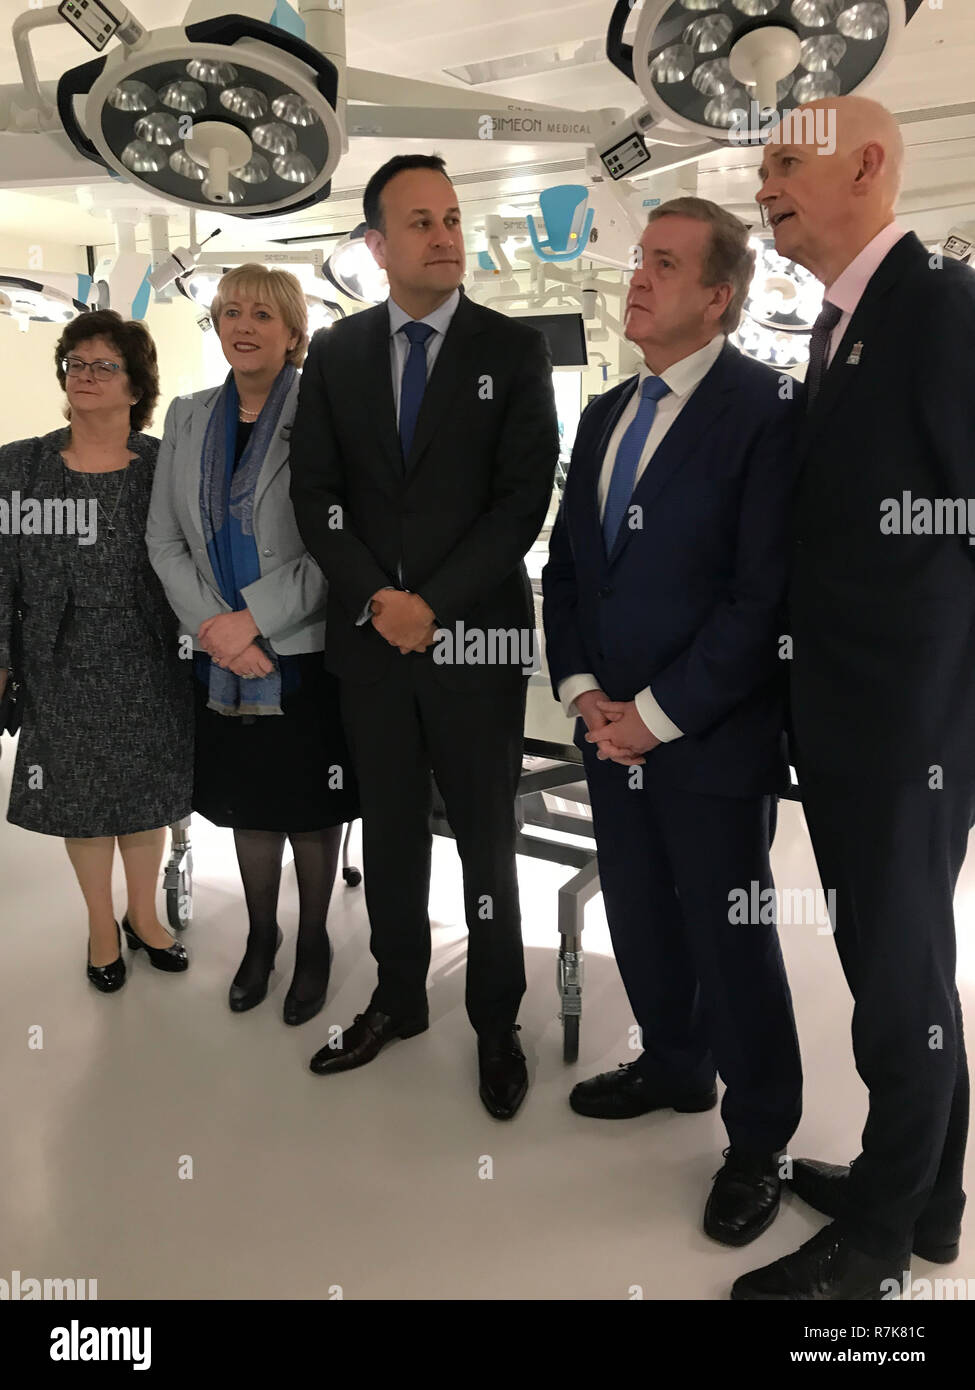 Taoiseach Leo Varadkar with Minister for Business Heather Humphreys (second left) and Minister for Trade Pat Breen (second right) at the Royal College of Surgeons in Ireland. The Taoiseach later told the media that the Brexit Withdrawal Agreement is the only agreement on the table. Stock Photo